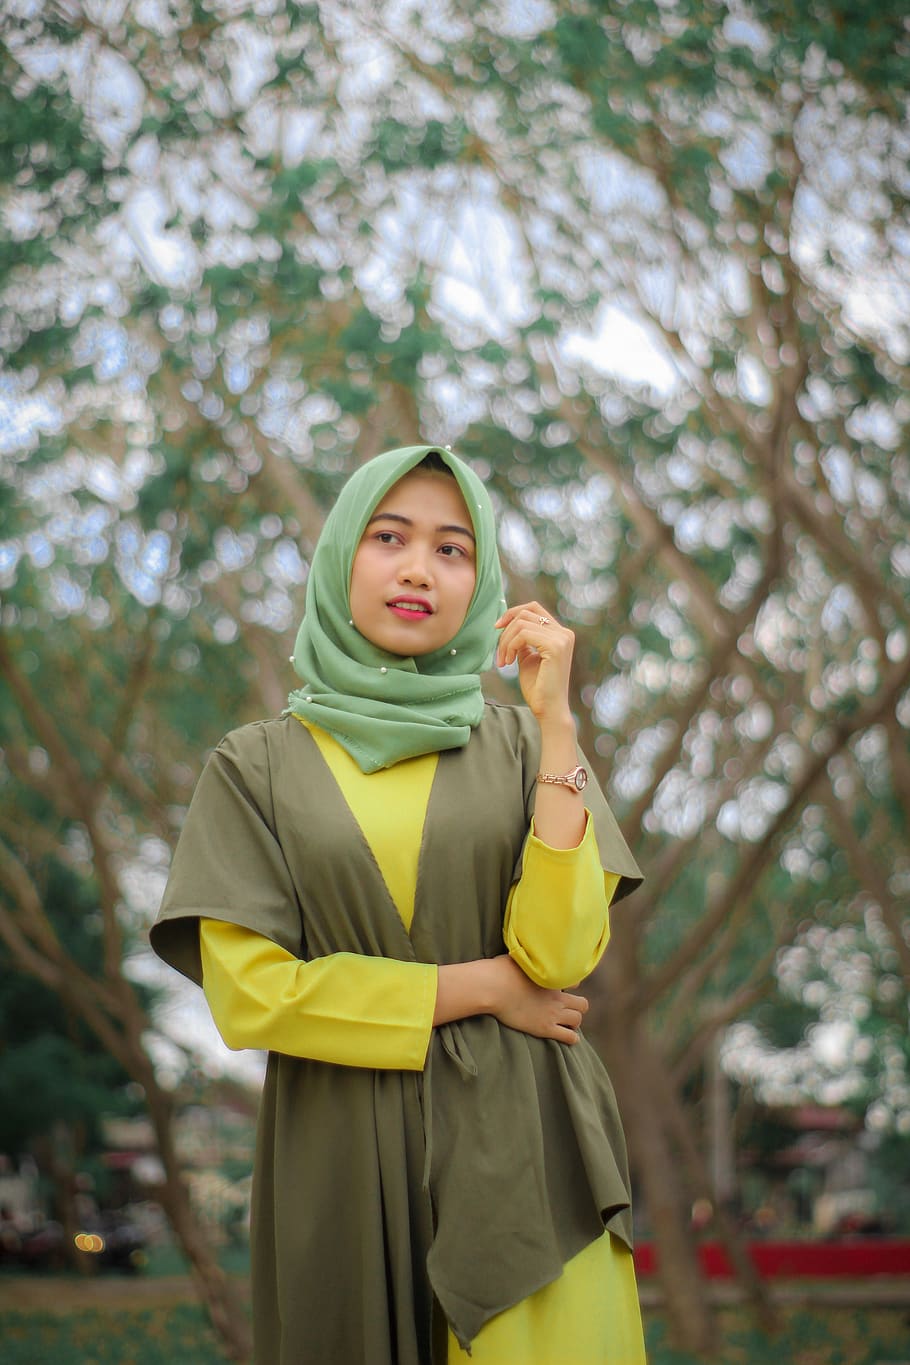 hijab, model, indonesia, women, girl, asia, beauty, front view